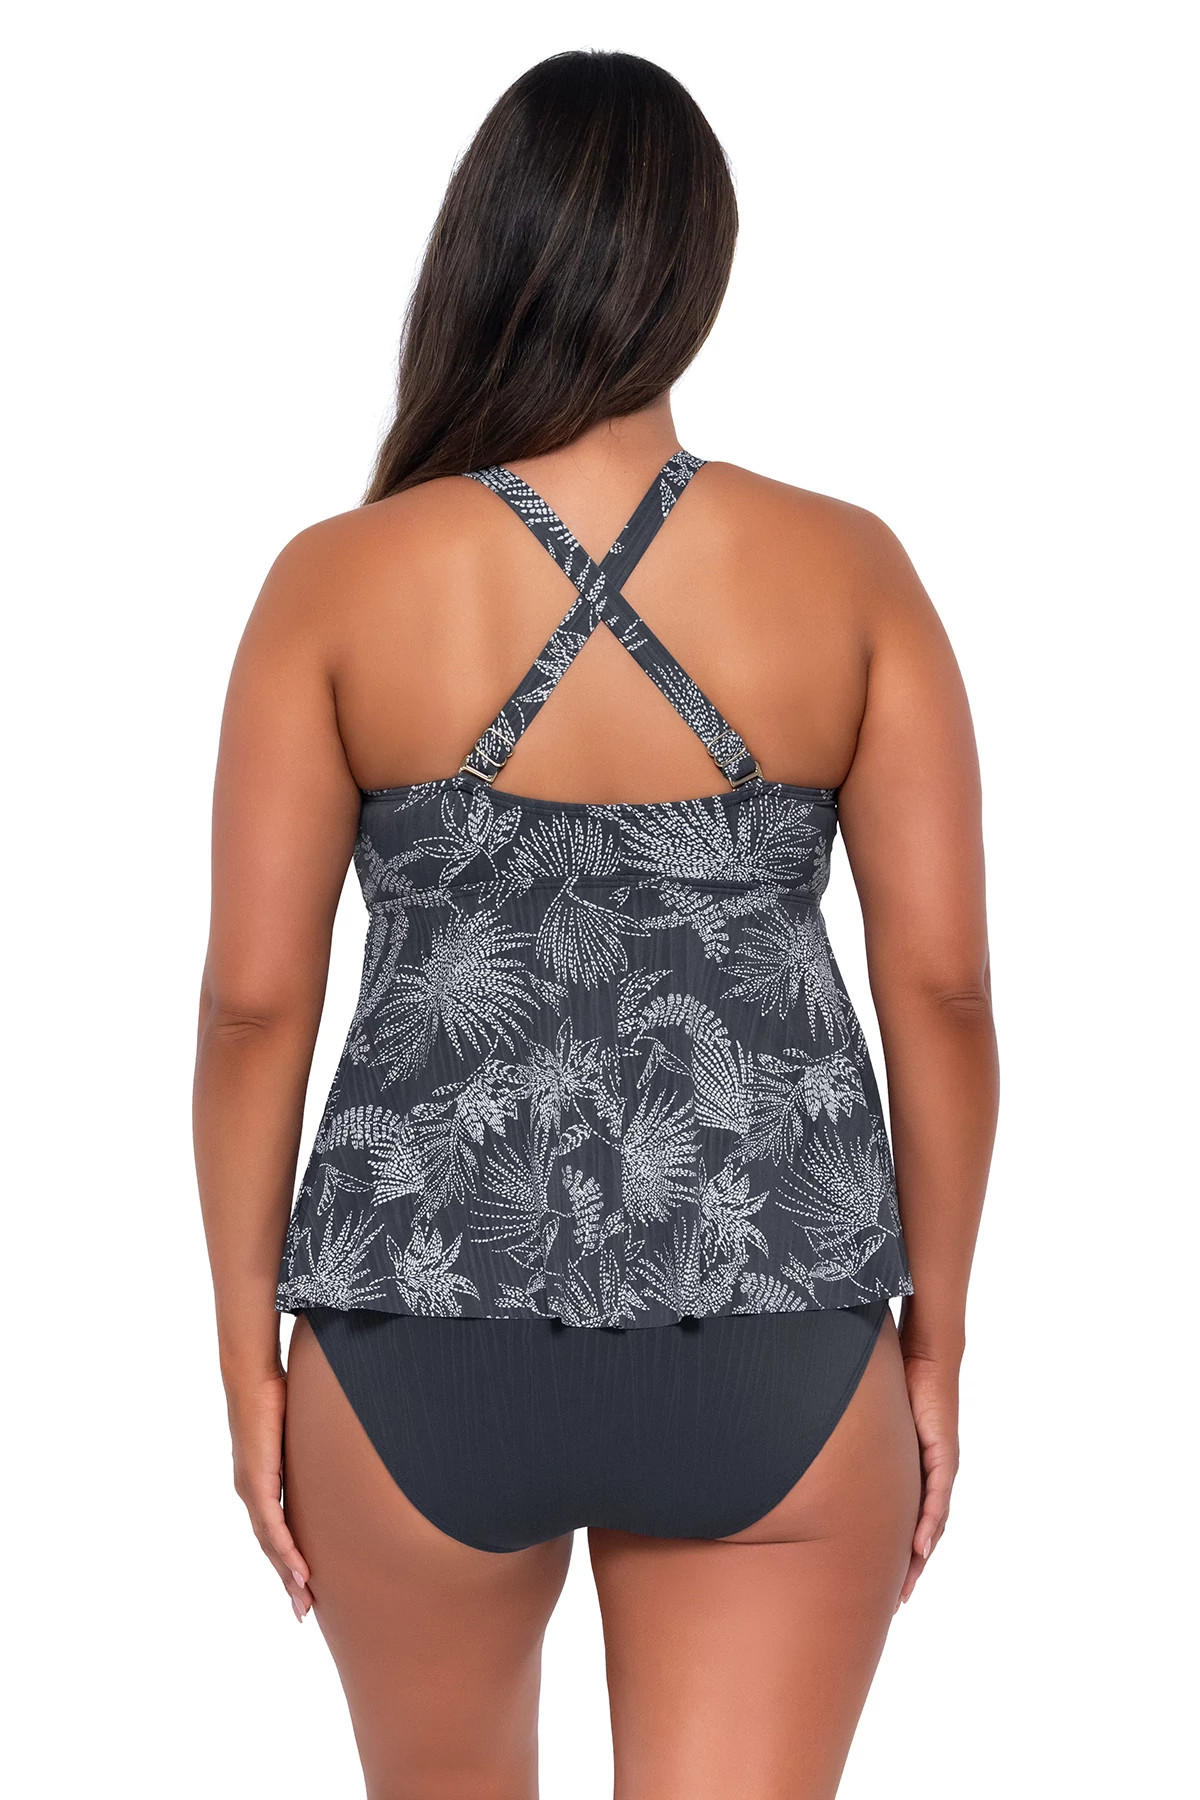 FANFARE SEAGRASS TEXTURE Marin Tankini Top image number 3